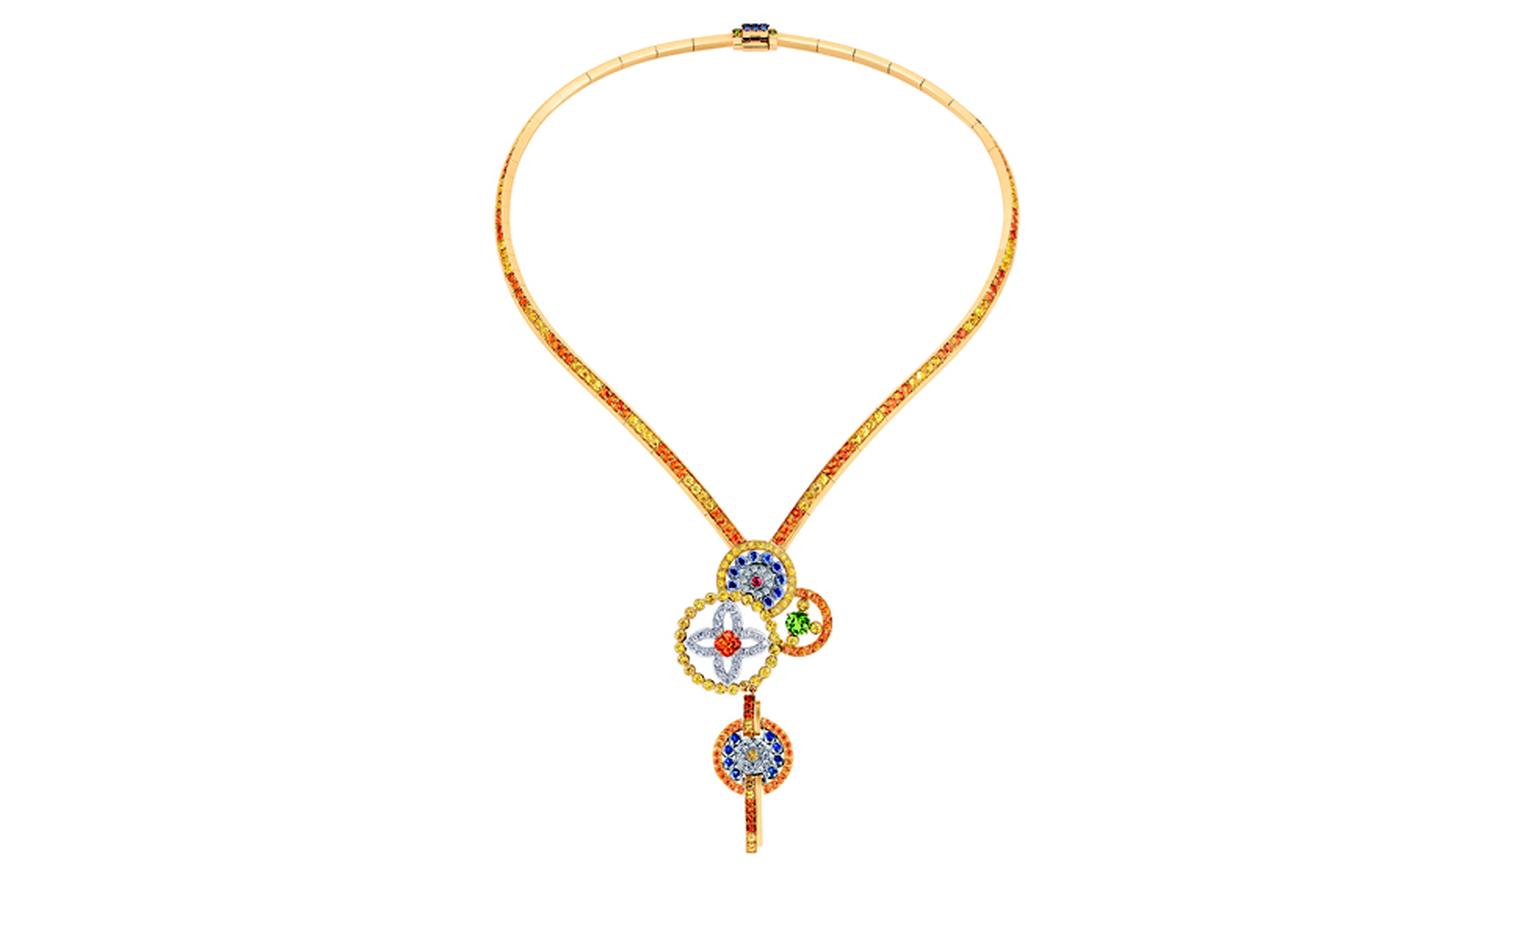 LOUIS VUITTON, Ornament Tribal Necklace, yellow gold, blue, yellow and pink sapphires, spessartite and tsavorite garnets and diamonds. £43,500